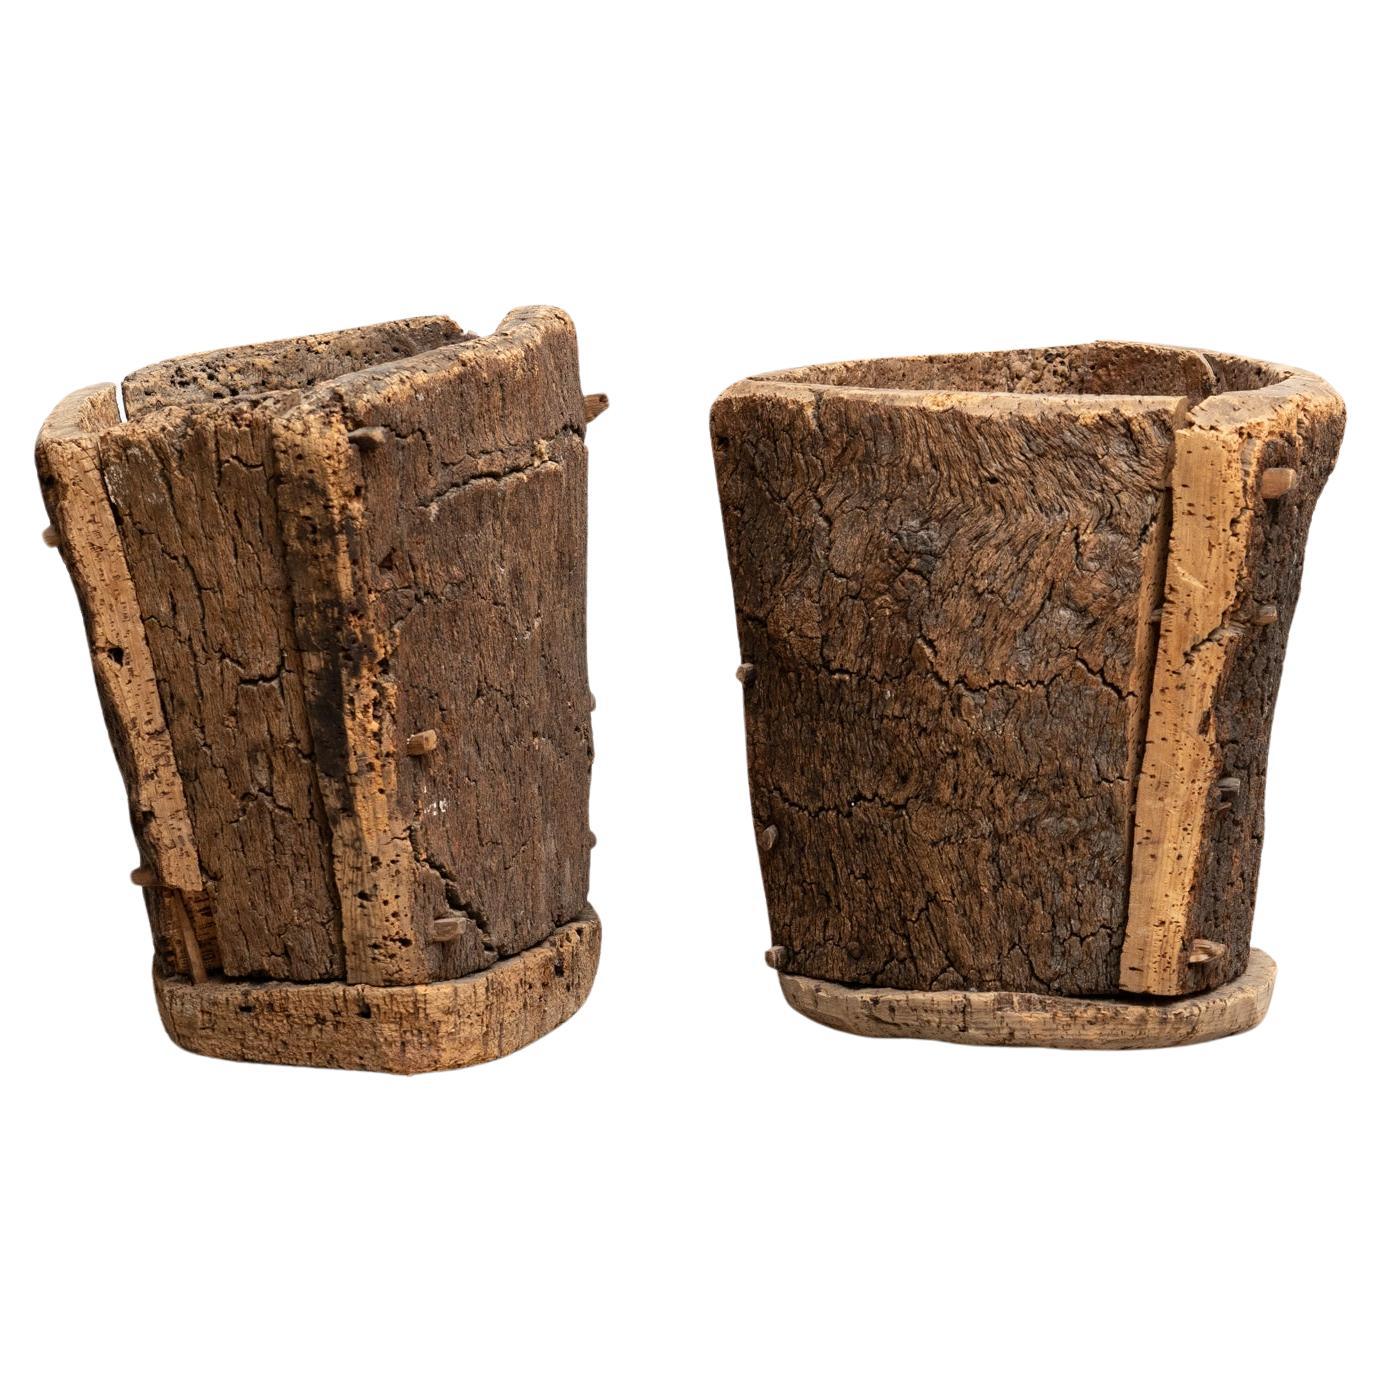 Brutalist Romance: Pair of Vintage Cork Trash Bins from the Early 20th Century